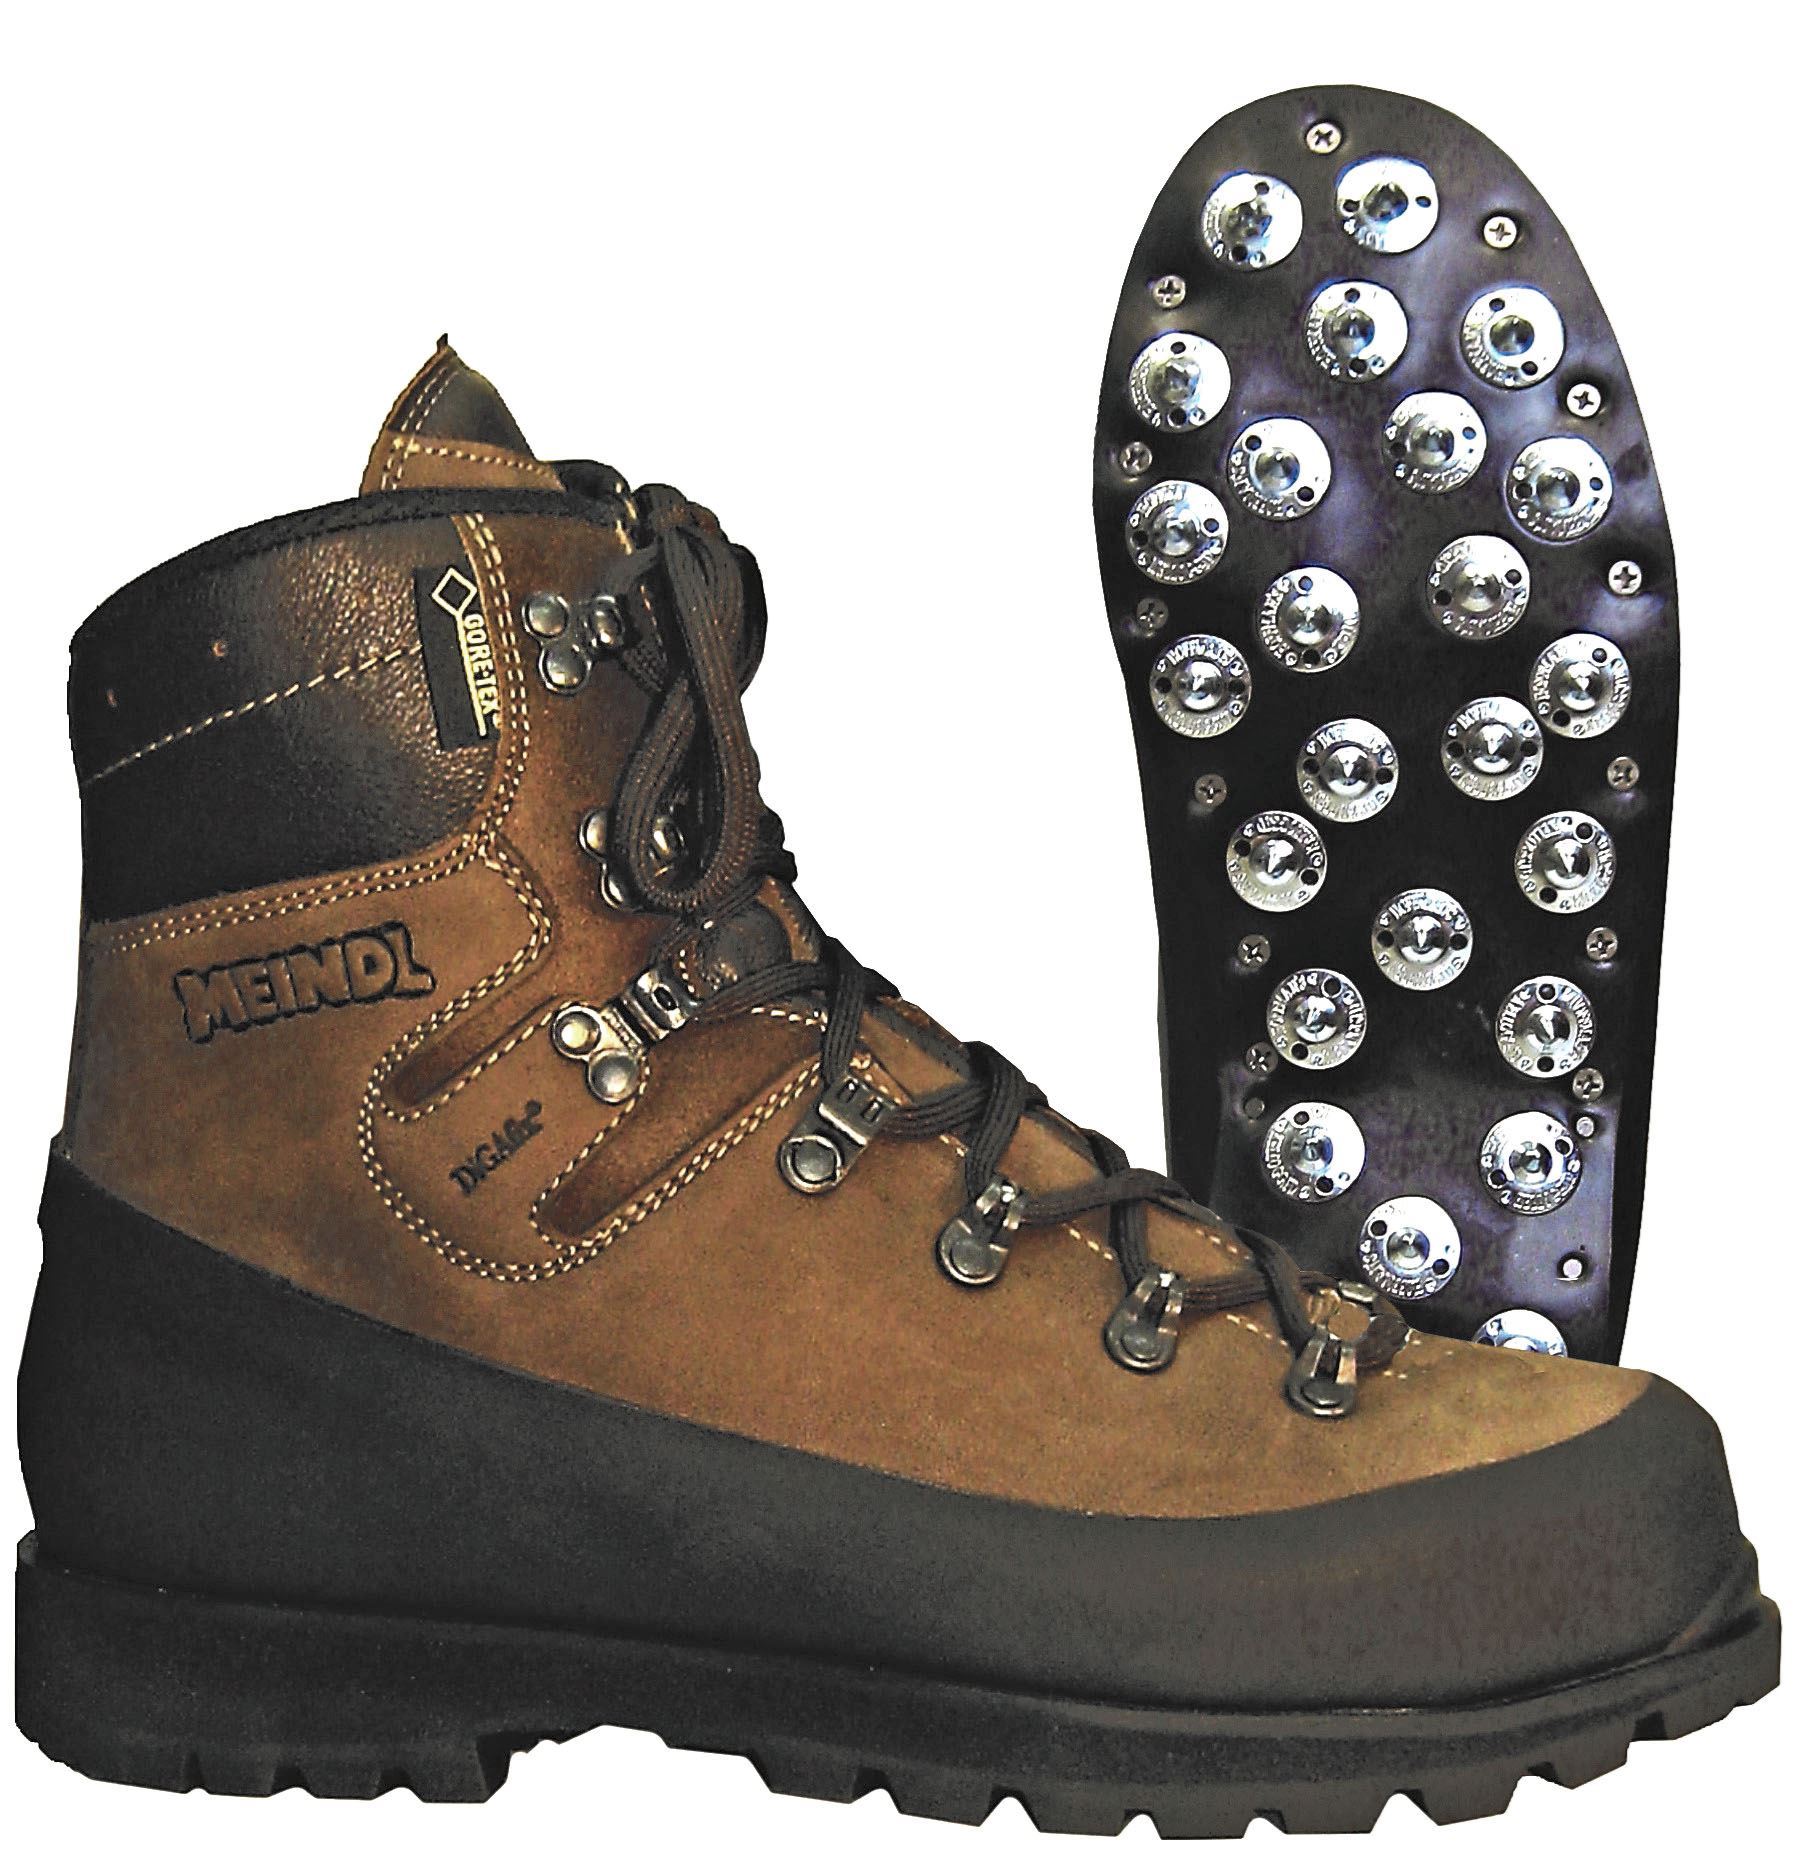 Calk Boot - Hoffman Boots For all Boot Needs